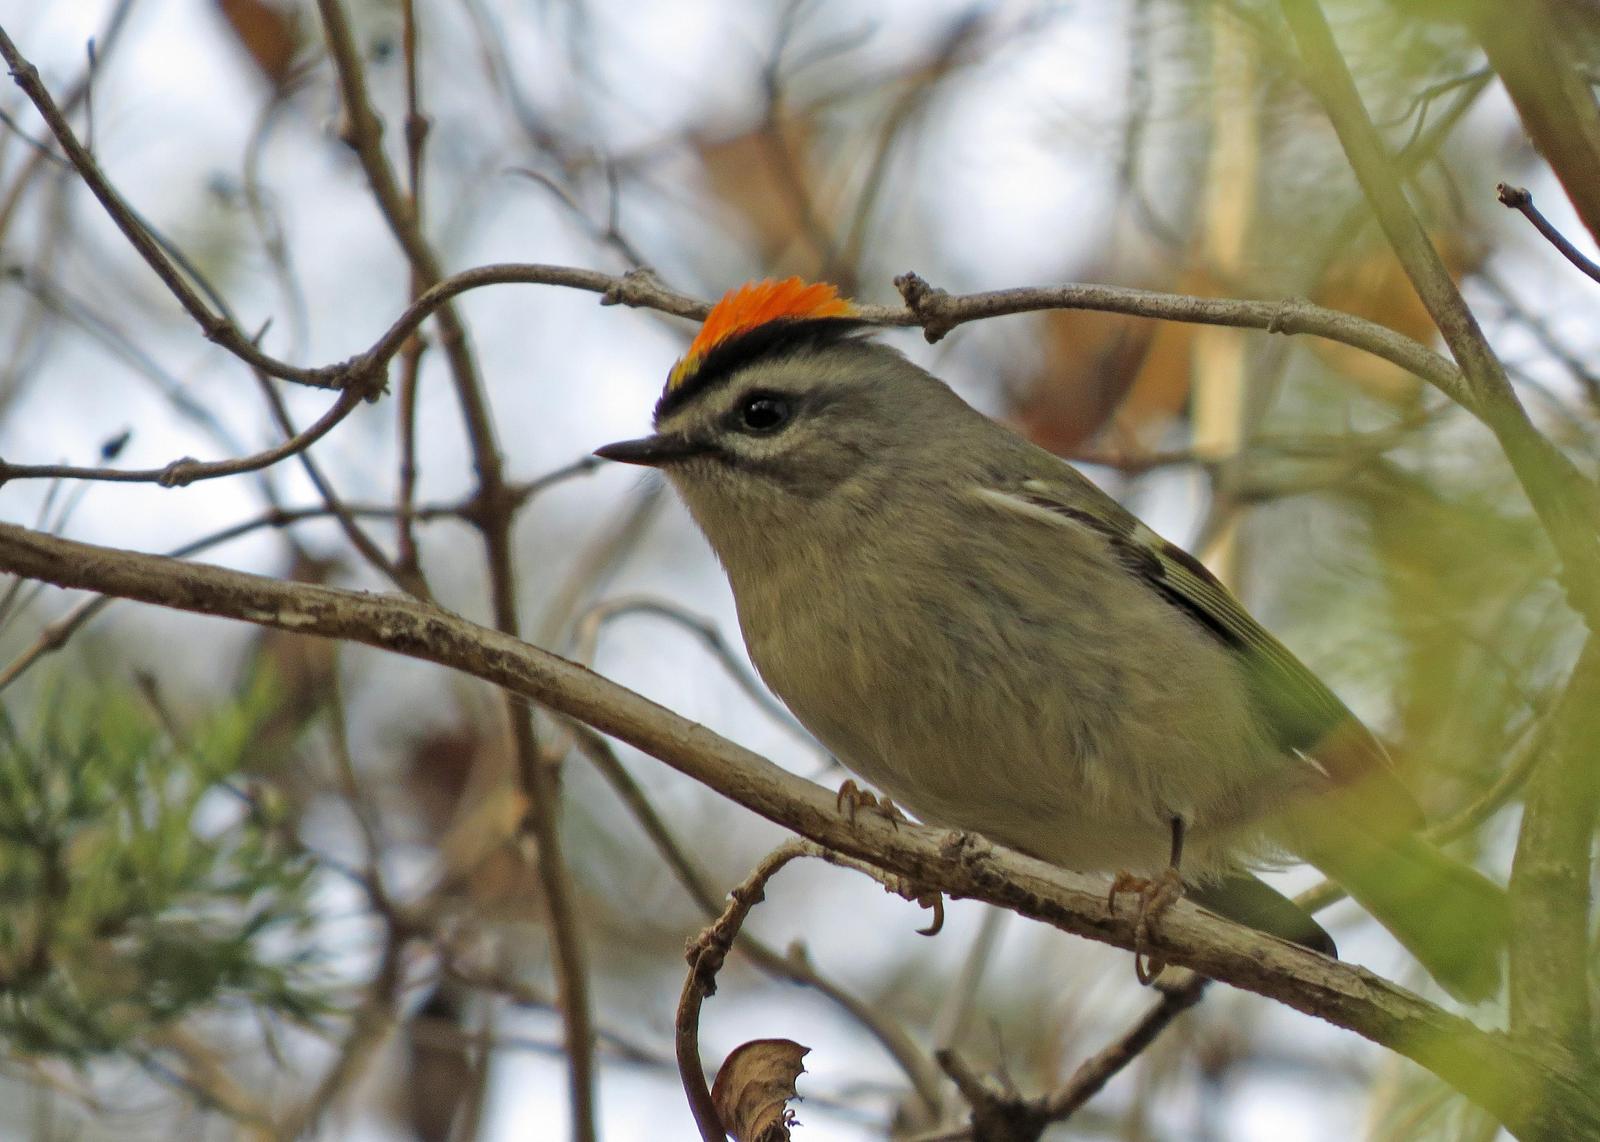 Golden-crowned Kinglet Photo by Kelly Preheim